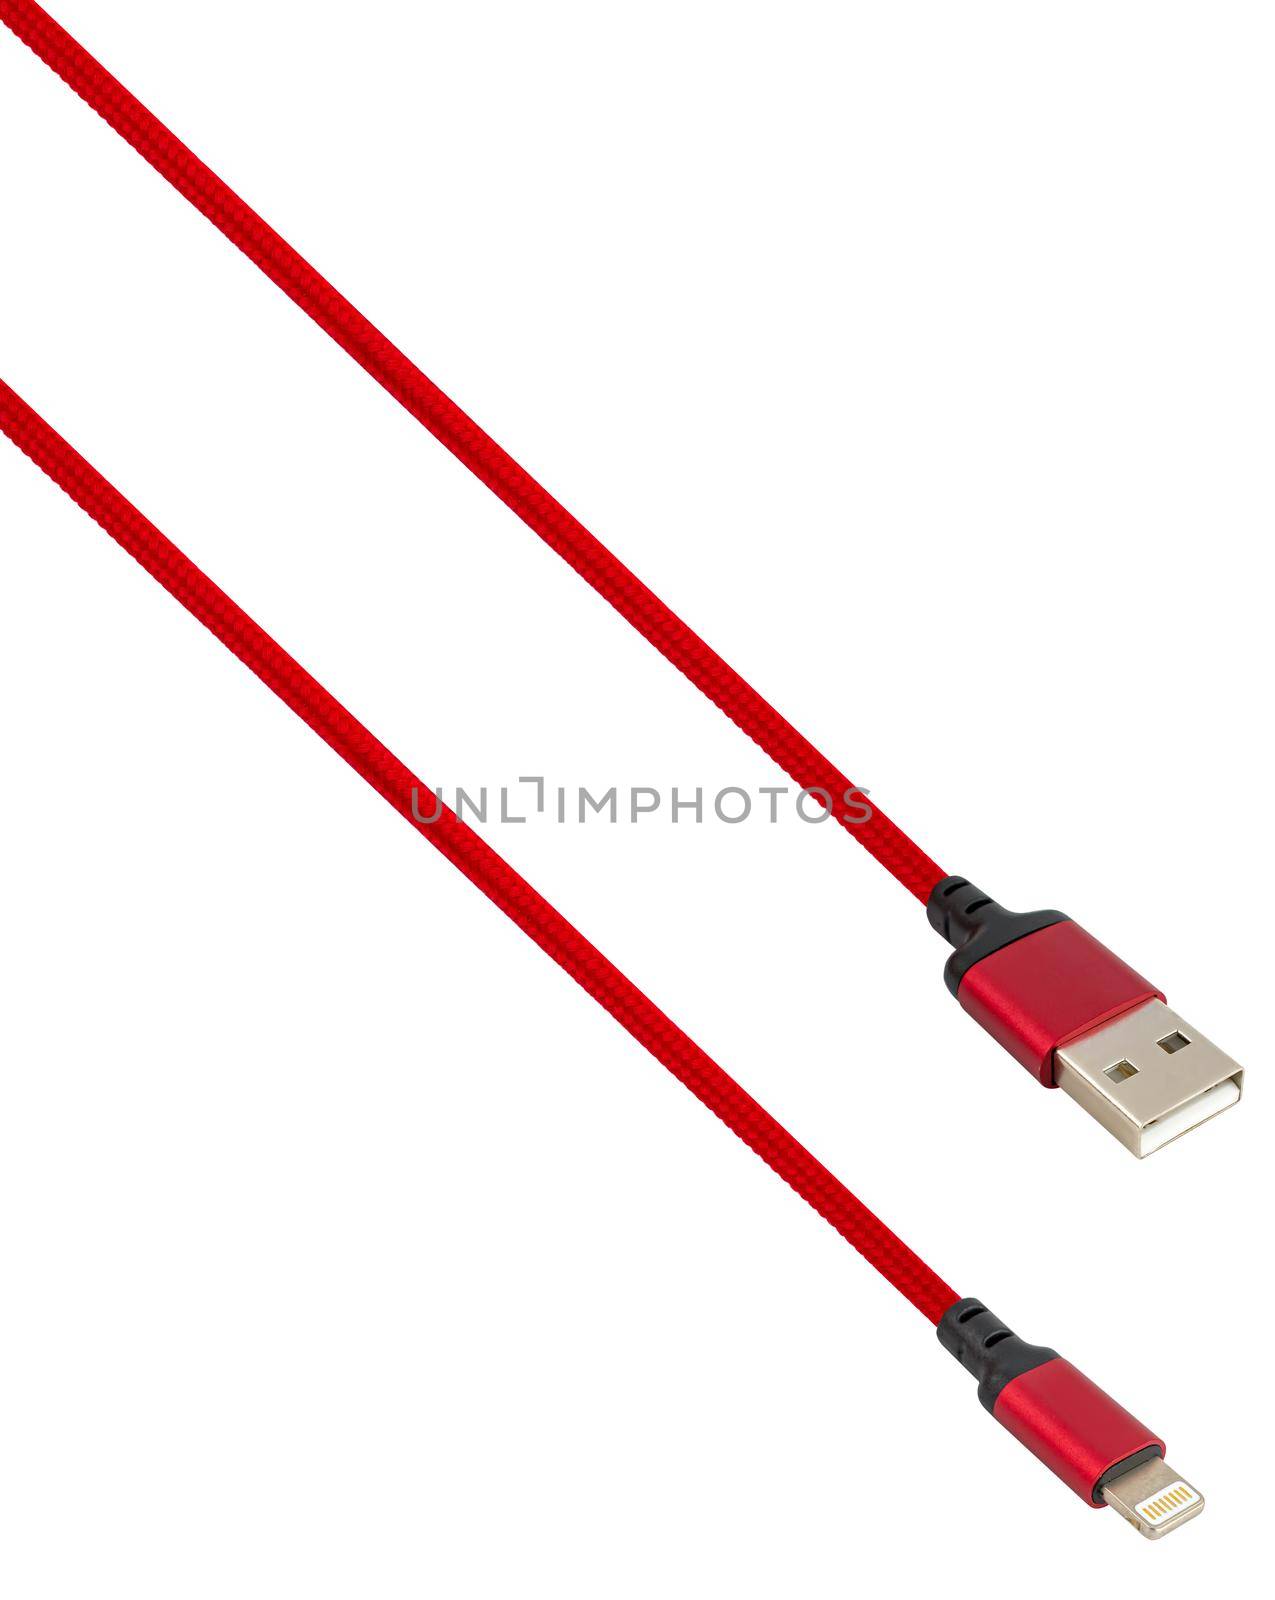 cable with USB and Lightning connector, isolated on white background